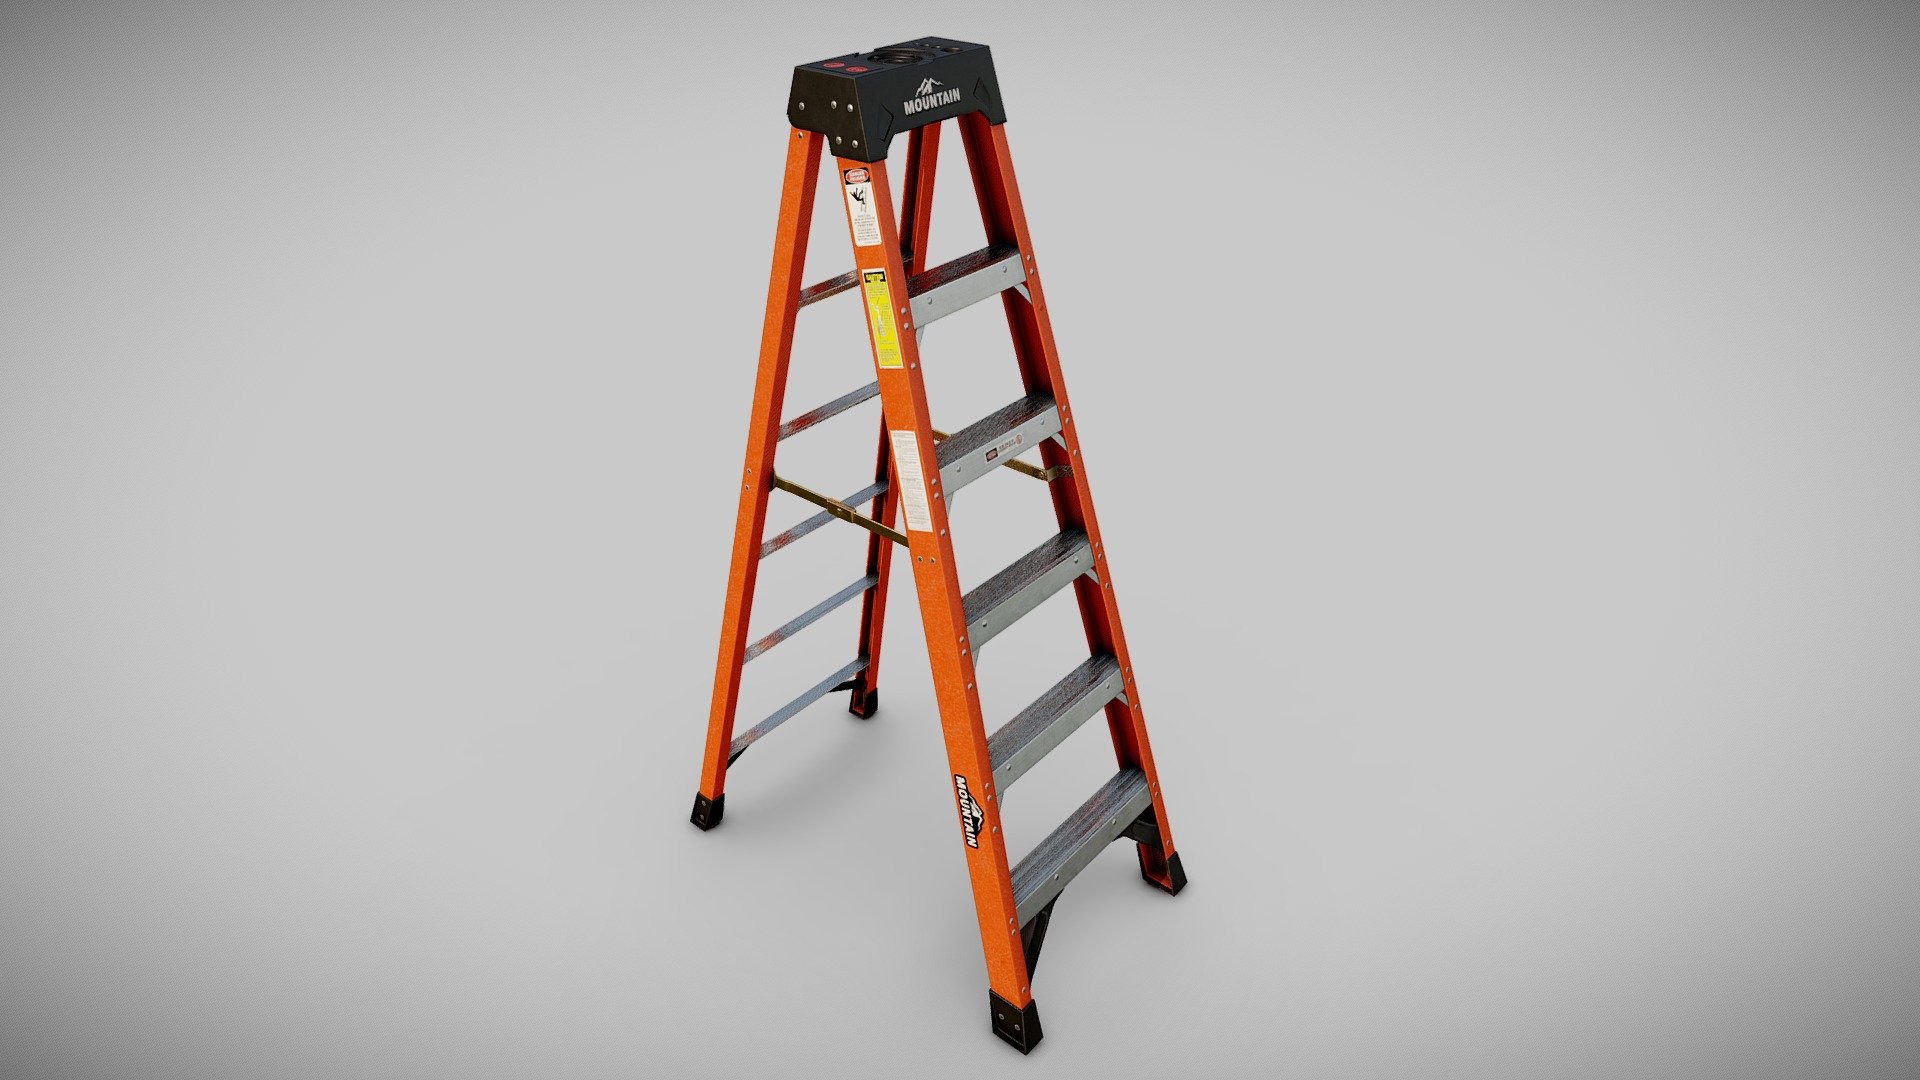 Free to everyone to use for anything. All I ask is that you consider me for your 3D projects! You can contact me at OliverTriplett3D@gmail.com - Fiberglass Step Ladder 6' (New) - Download Free 3D model by Oliver Triplett (@OliverTriplett) 3d model